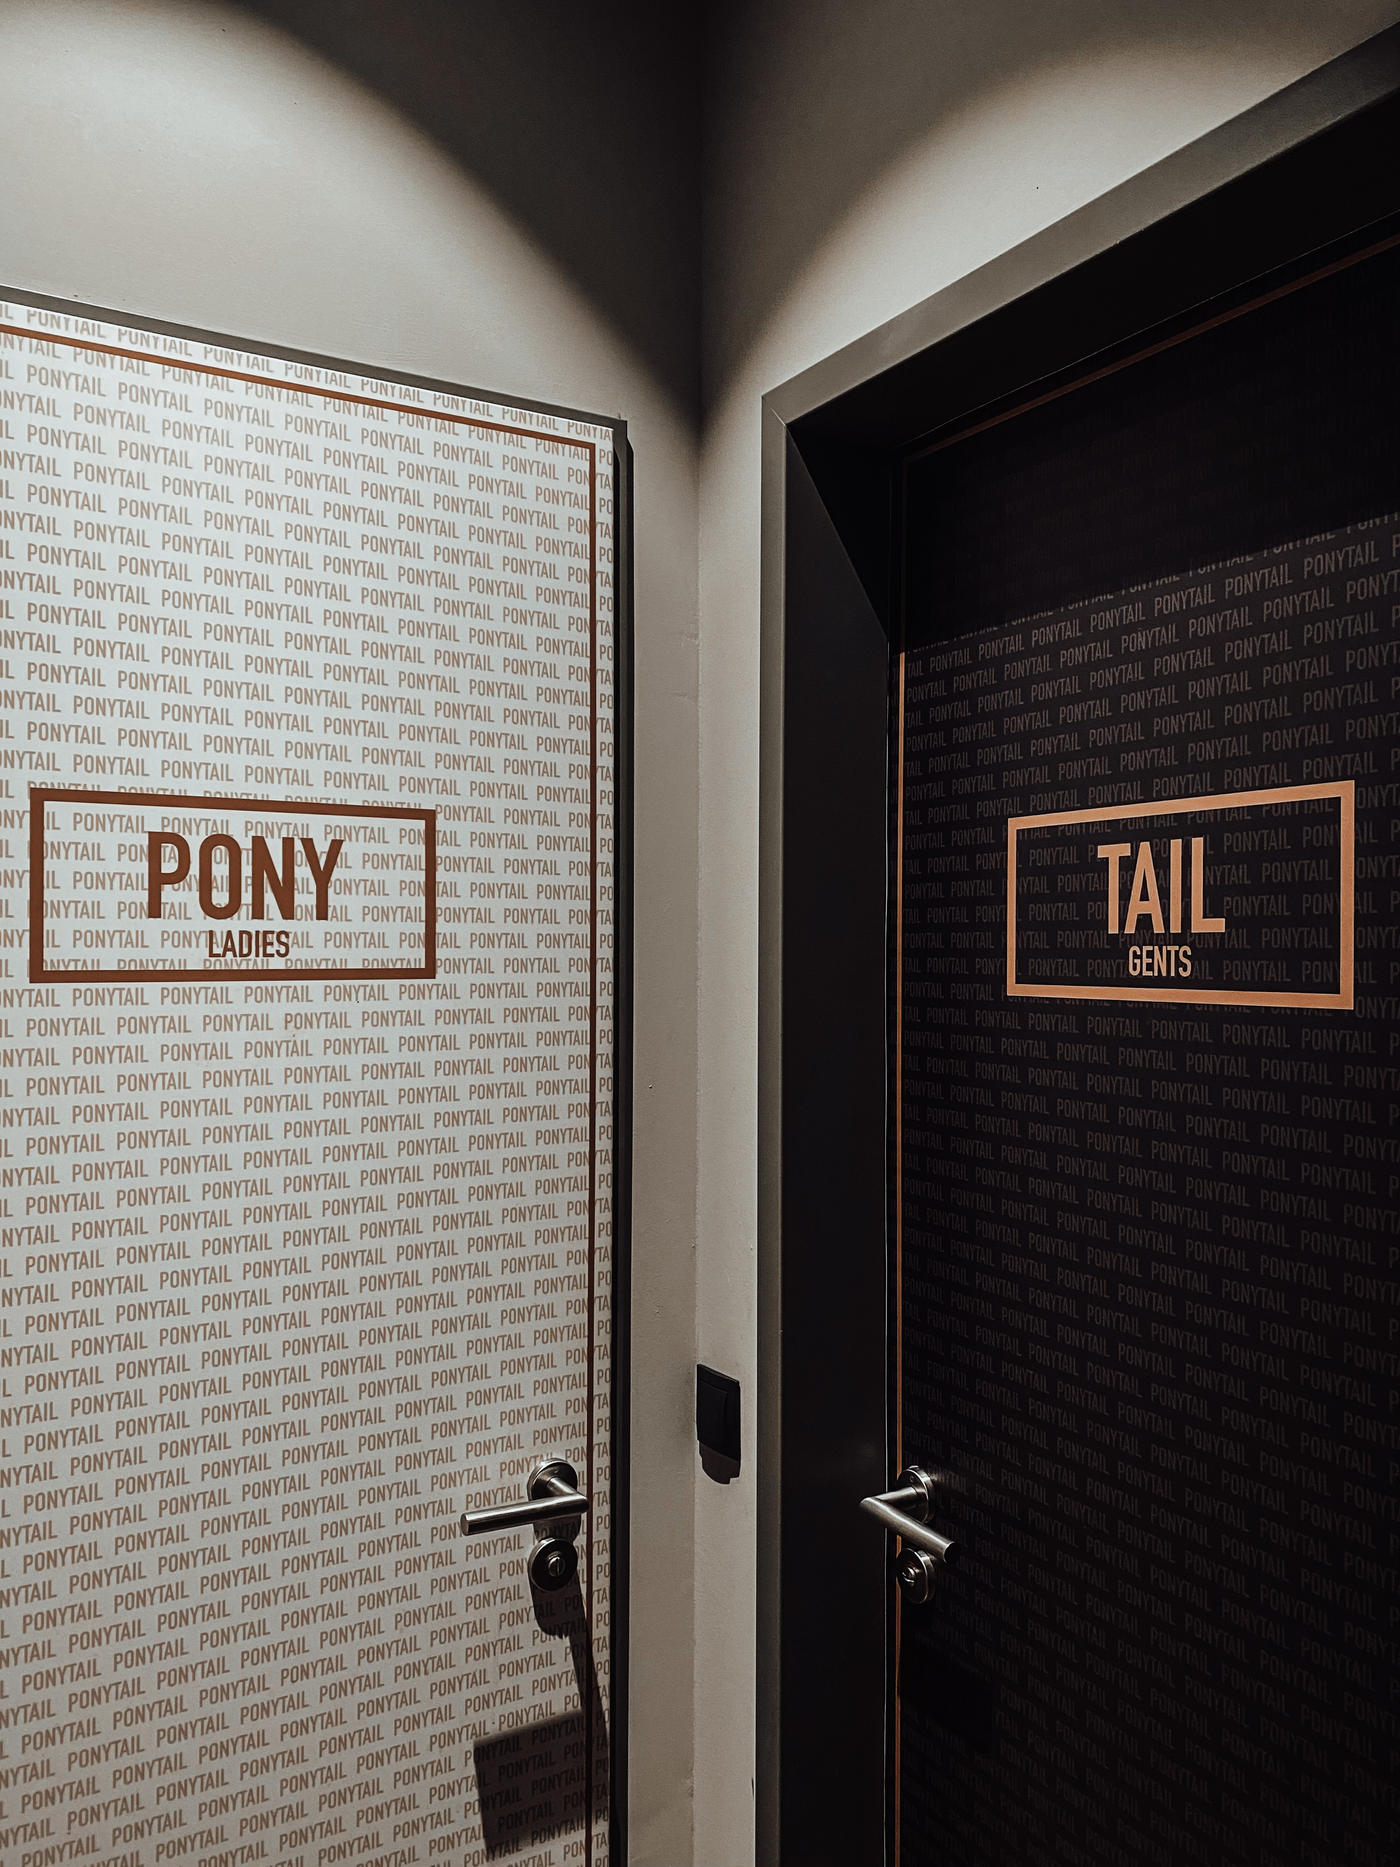 Pony or Tail?!